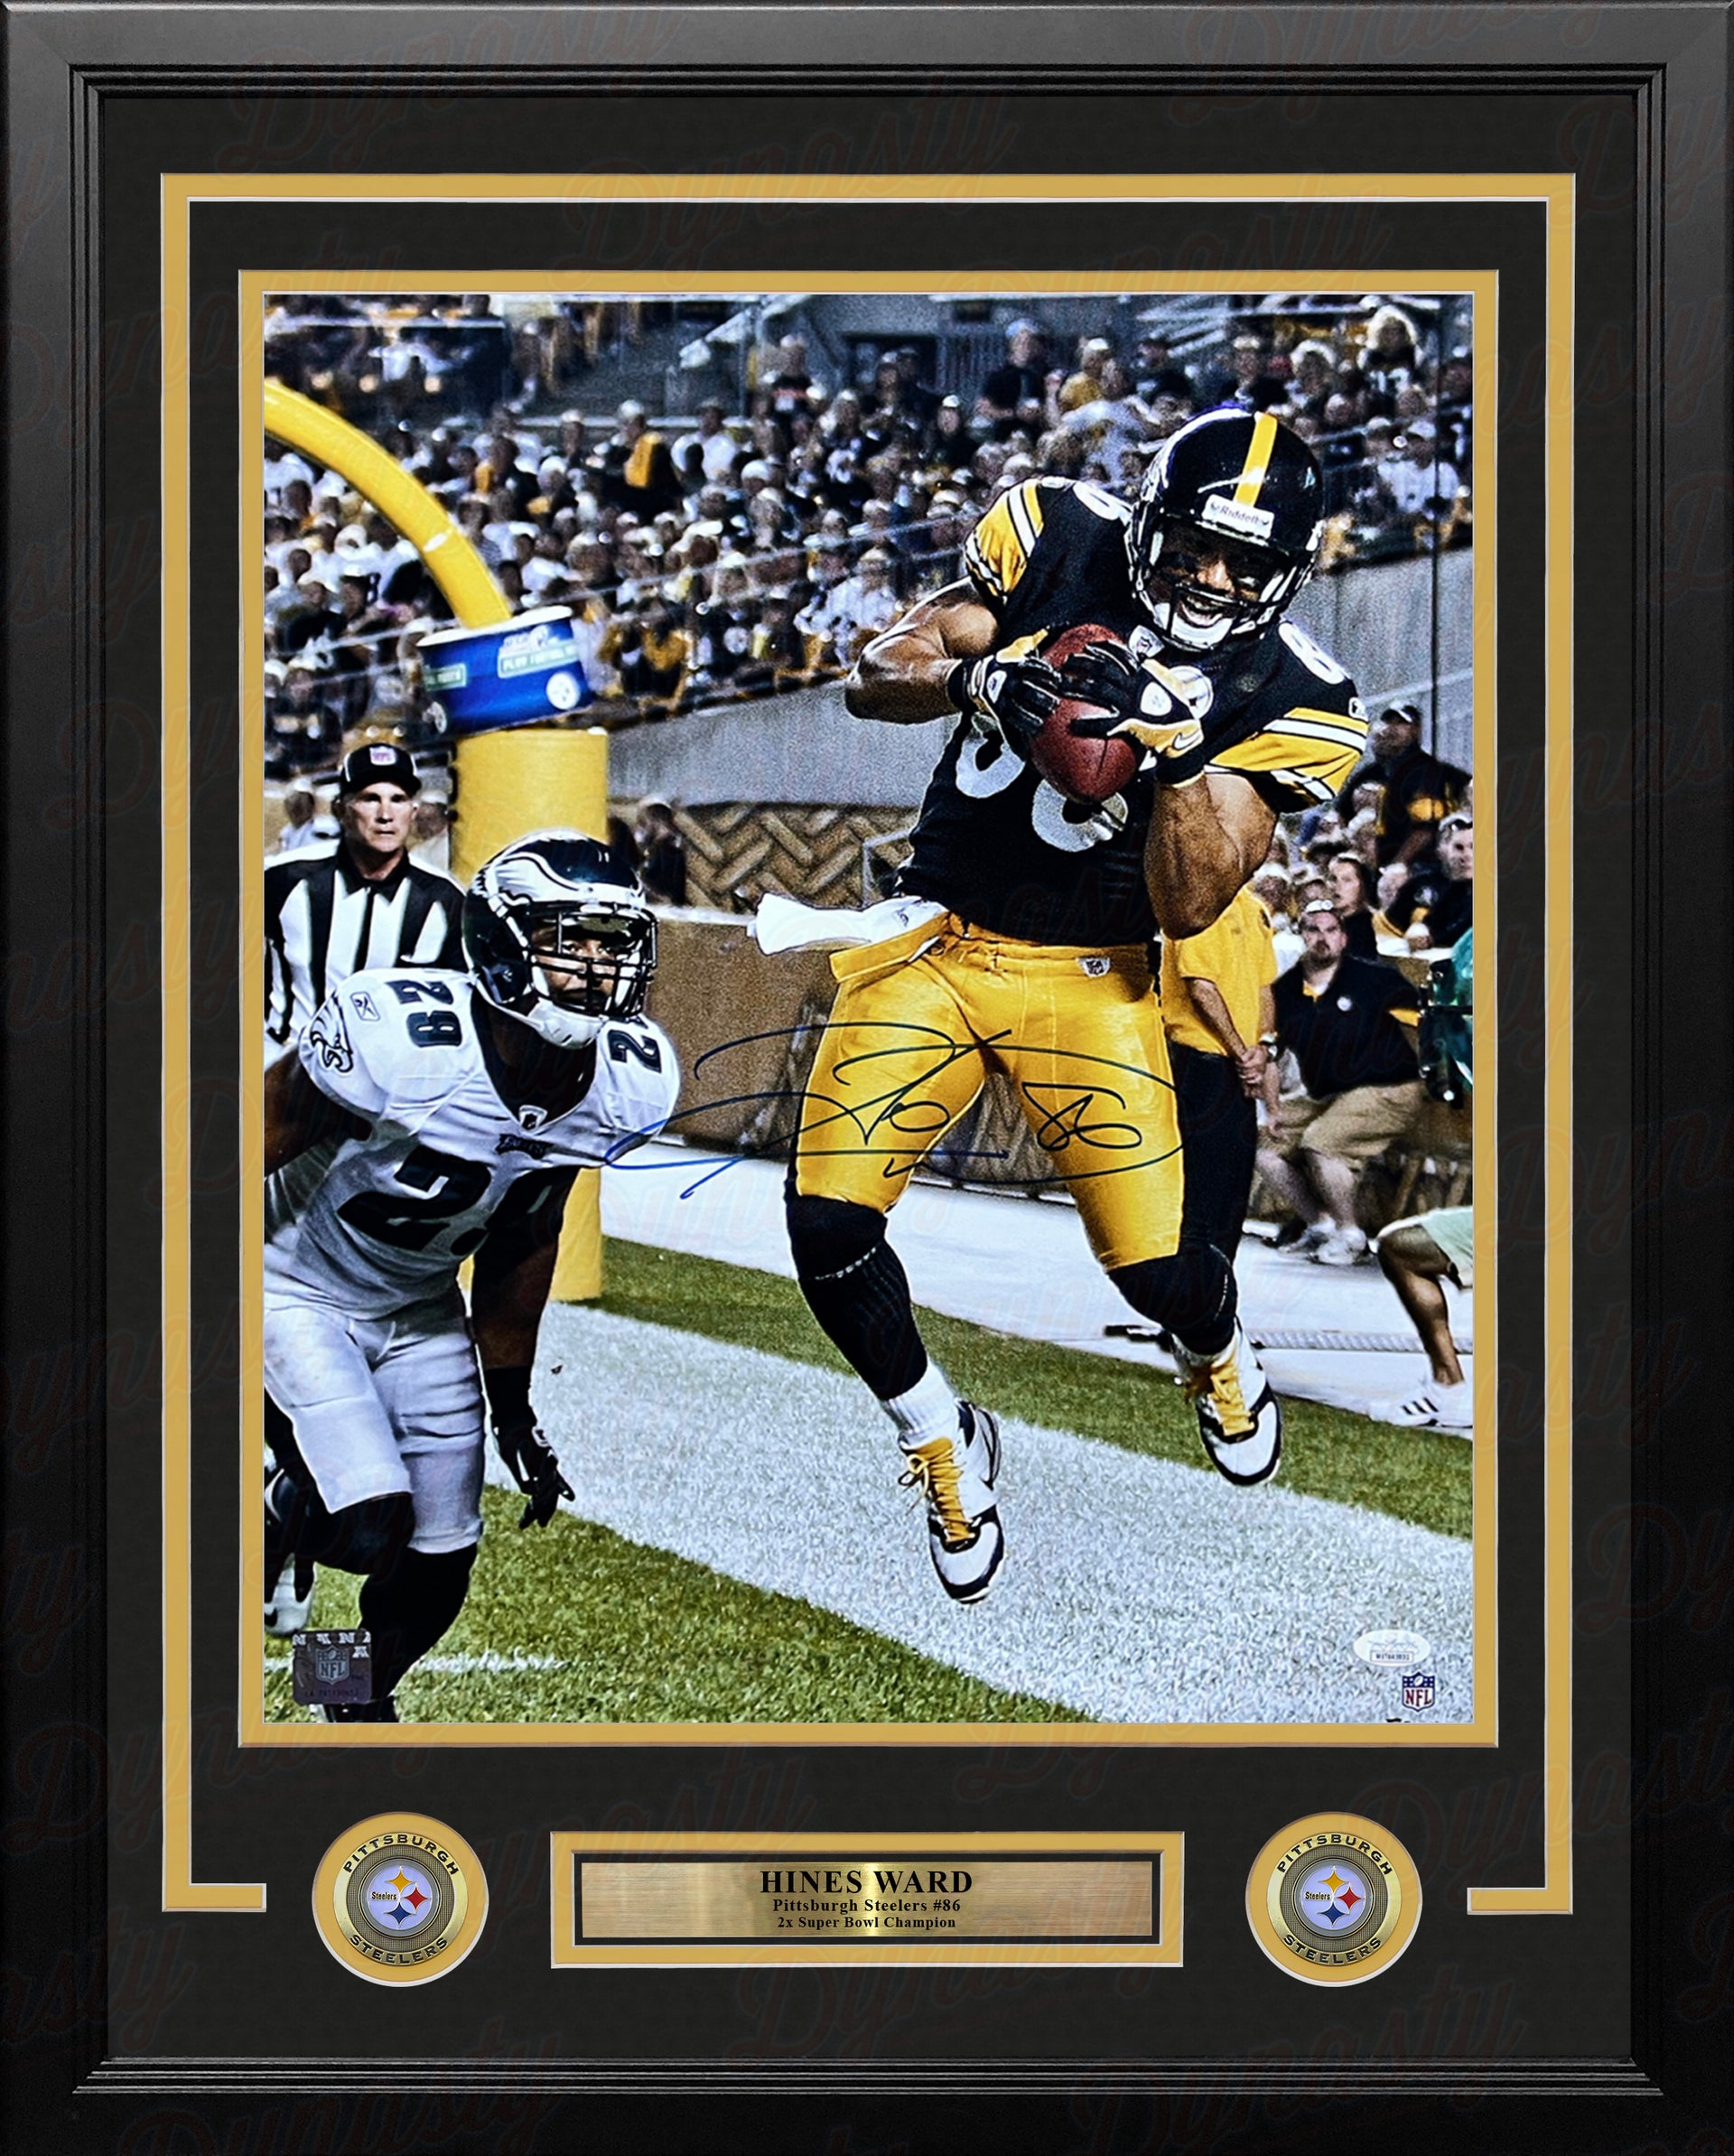 Hines Ward Leaping Touchdown Pittsburgh Steelers Autographed 16" x 20" Framed Football Photo - Dynasty Sports & Framing 